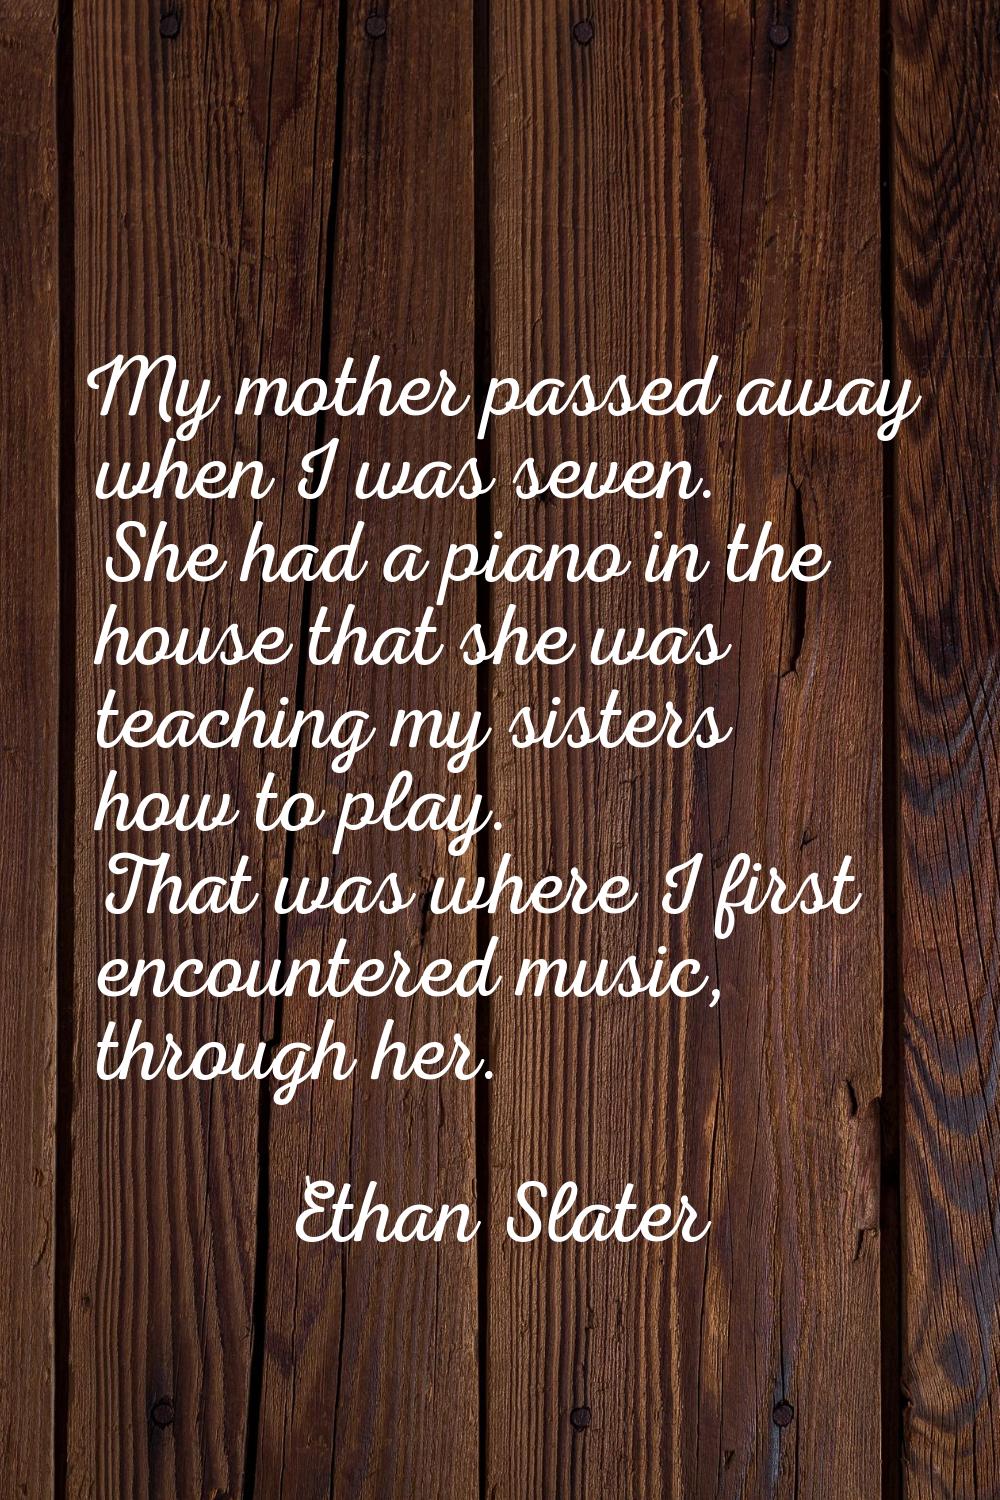 My mother passed away when I was seven. She had a piano in the house that she was teaching my siste